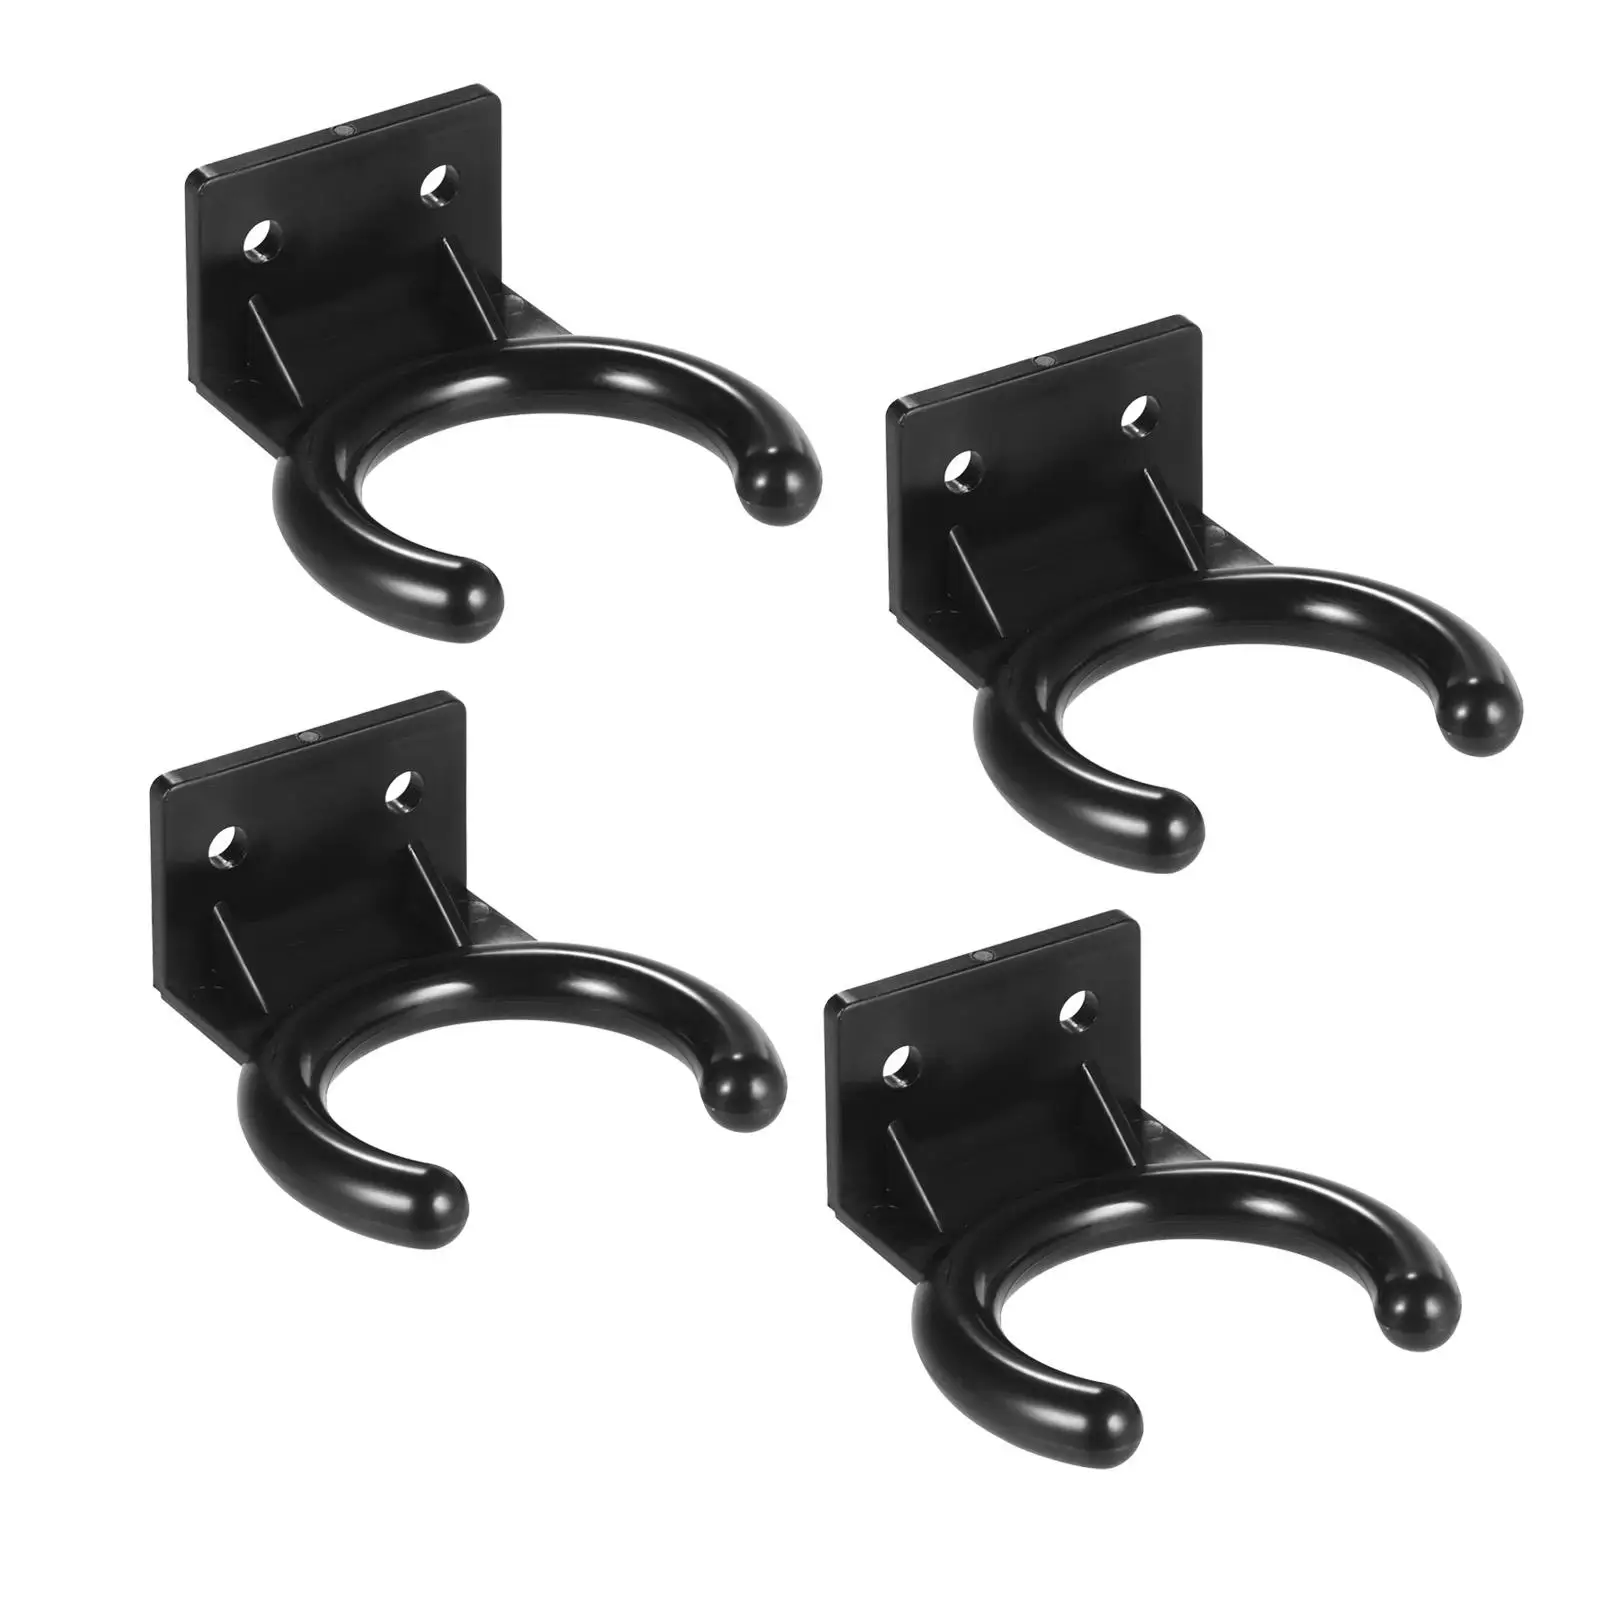 4Pcs Wall Mounted Microphone Hook Wall Hanger Stands Accessories Black Durable Rack Clip Holder for Home KTV Space Saving